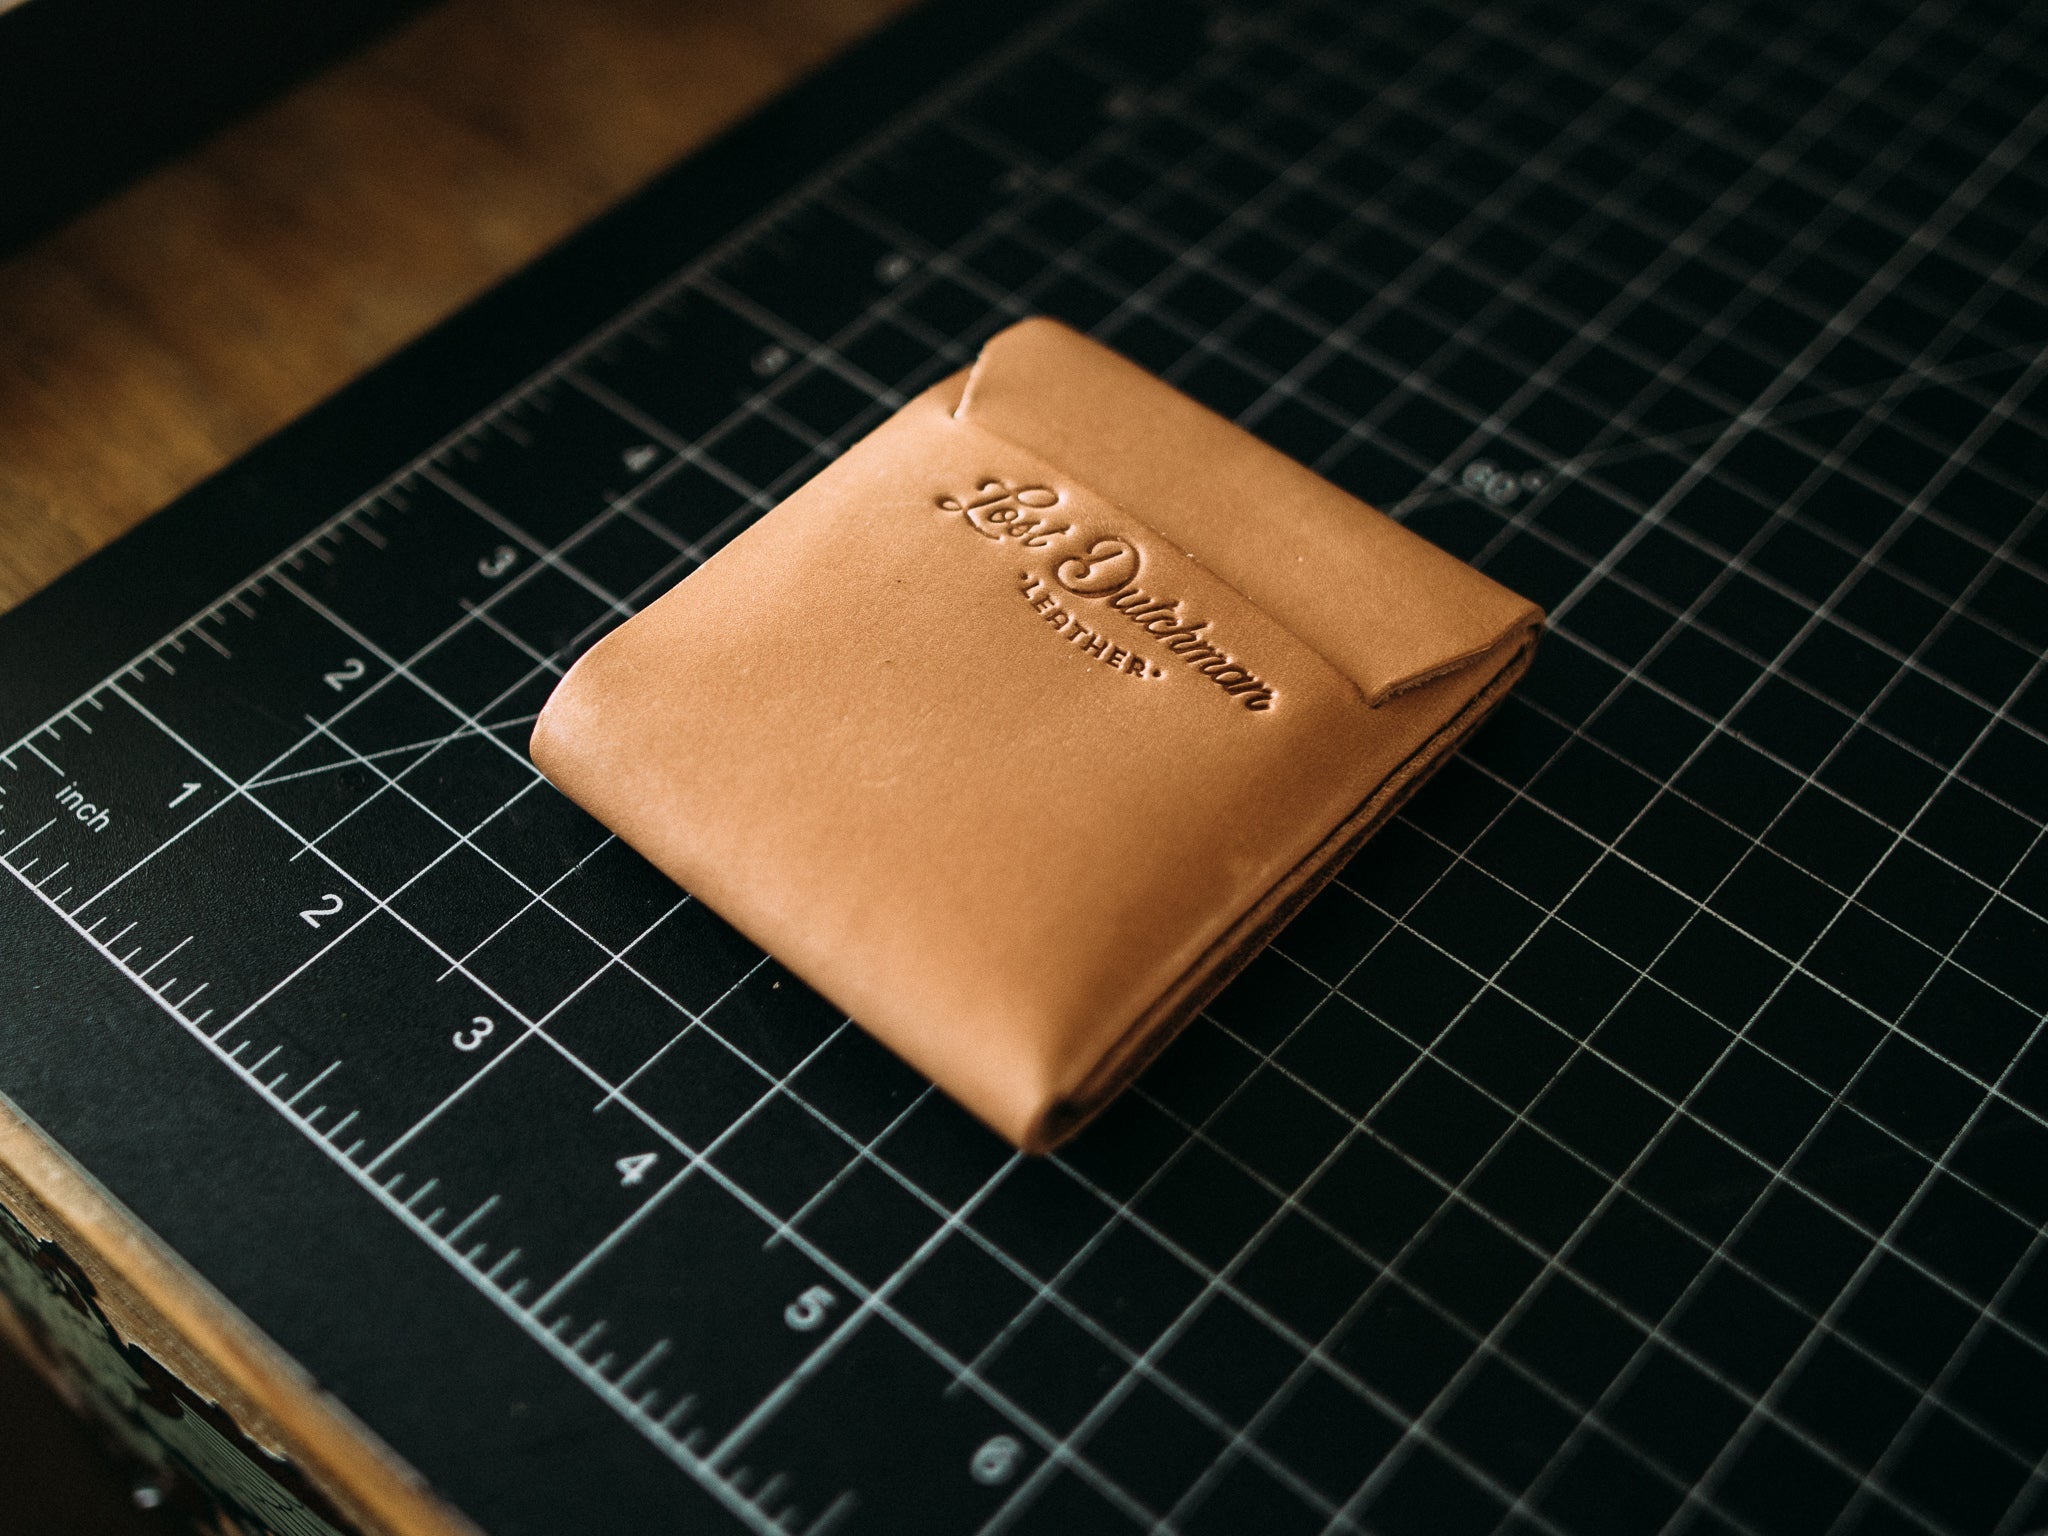 Leather Card Holder - The Slim Dutchman Navy / Brown